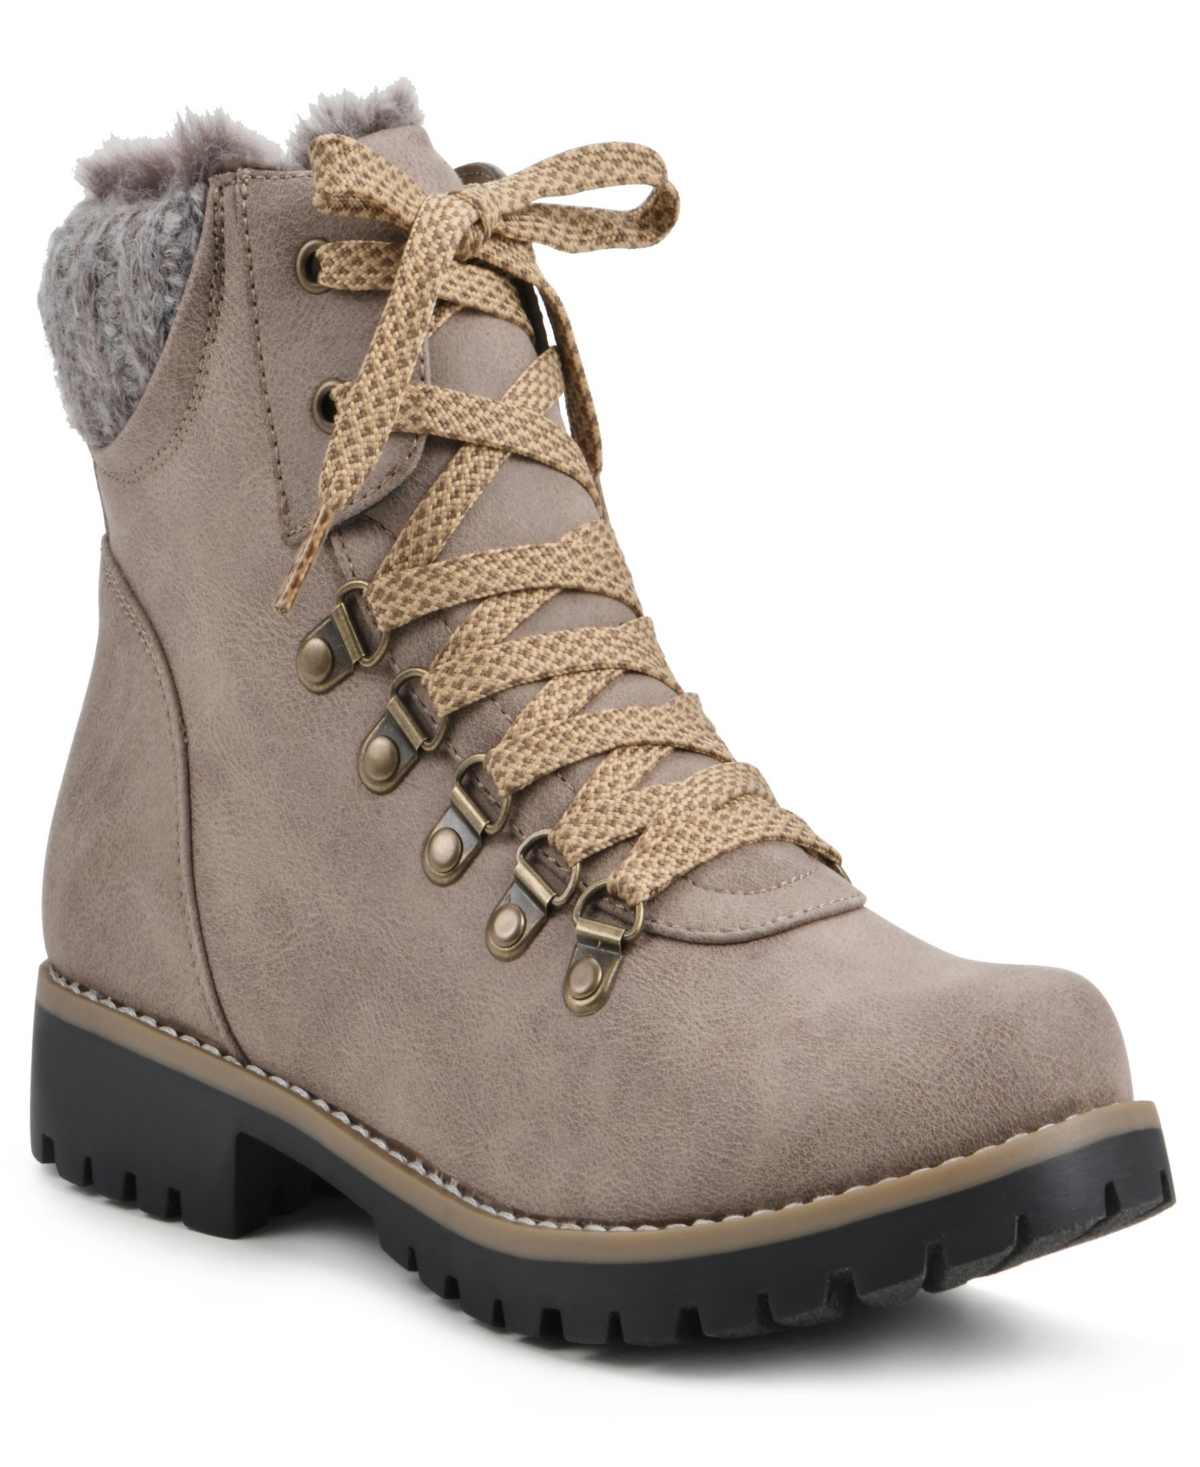 Women's Prized Lace-Up Hiker Booties - Taupe Fabric